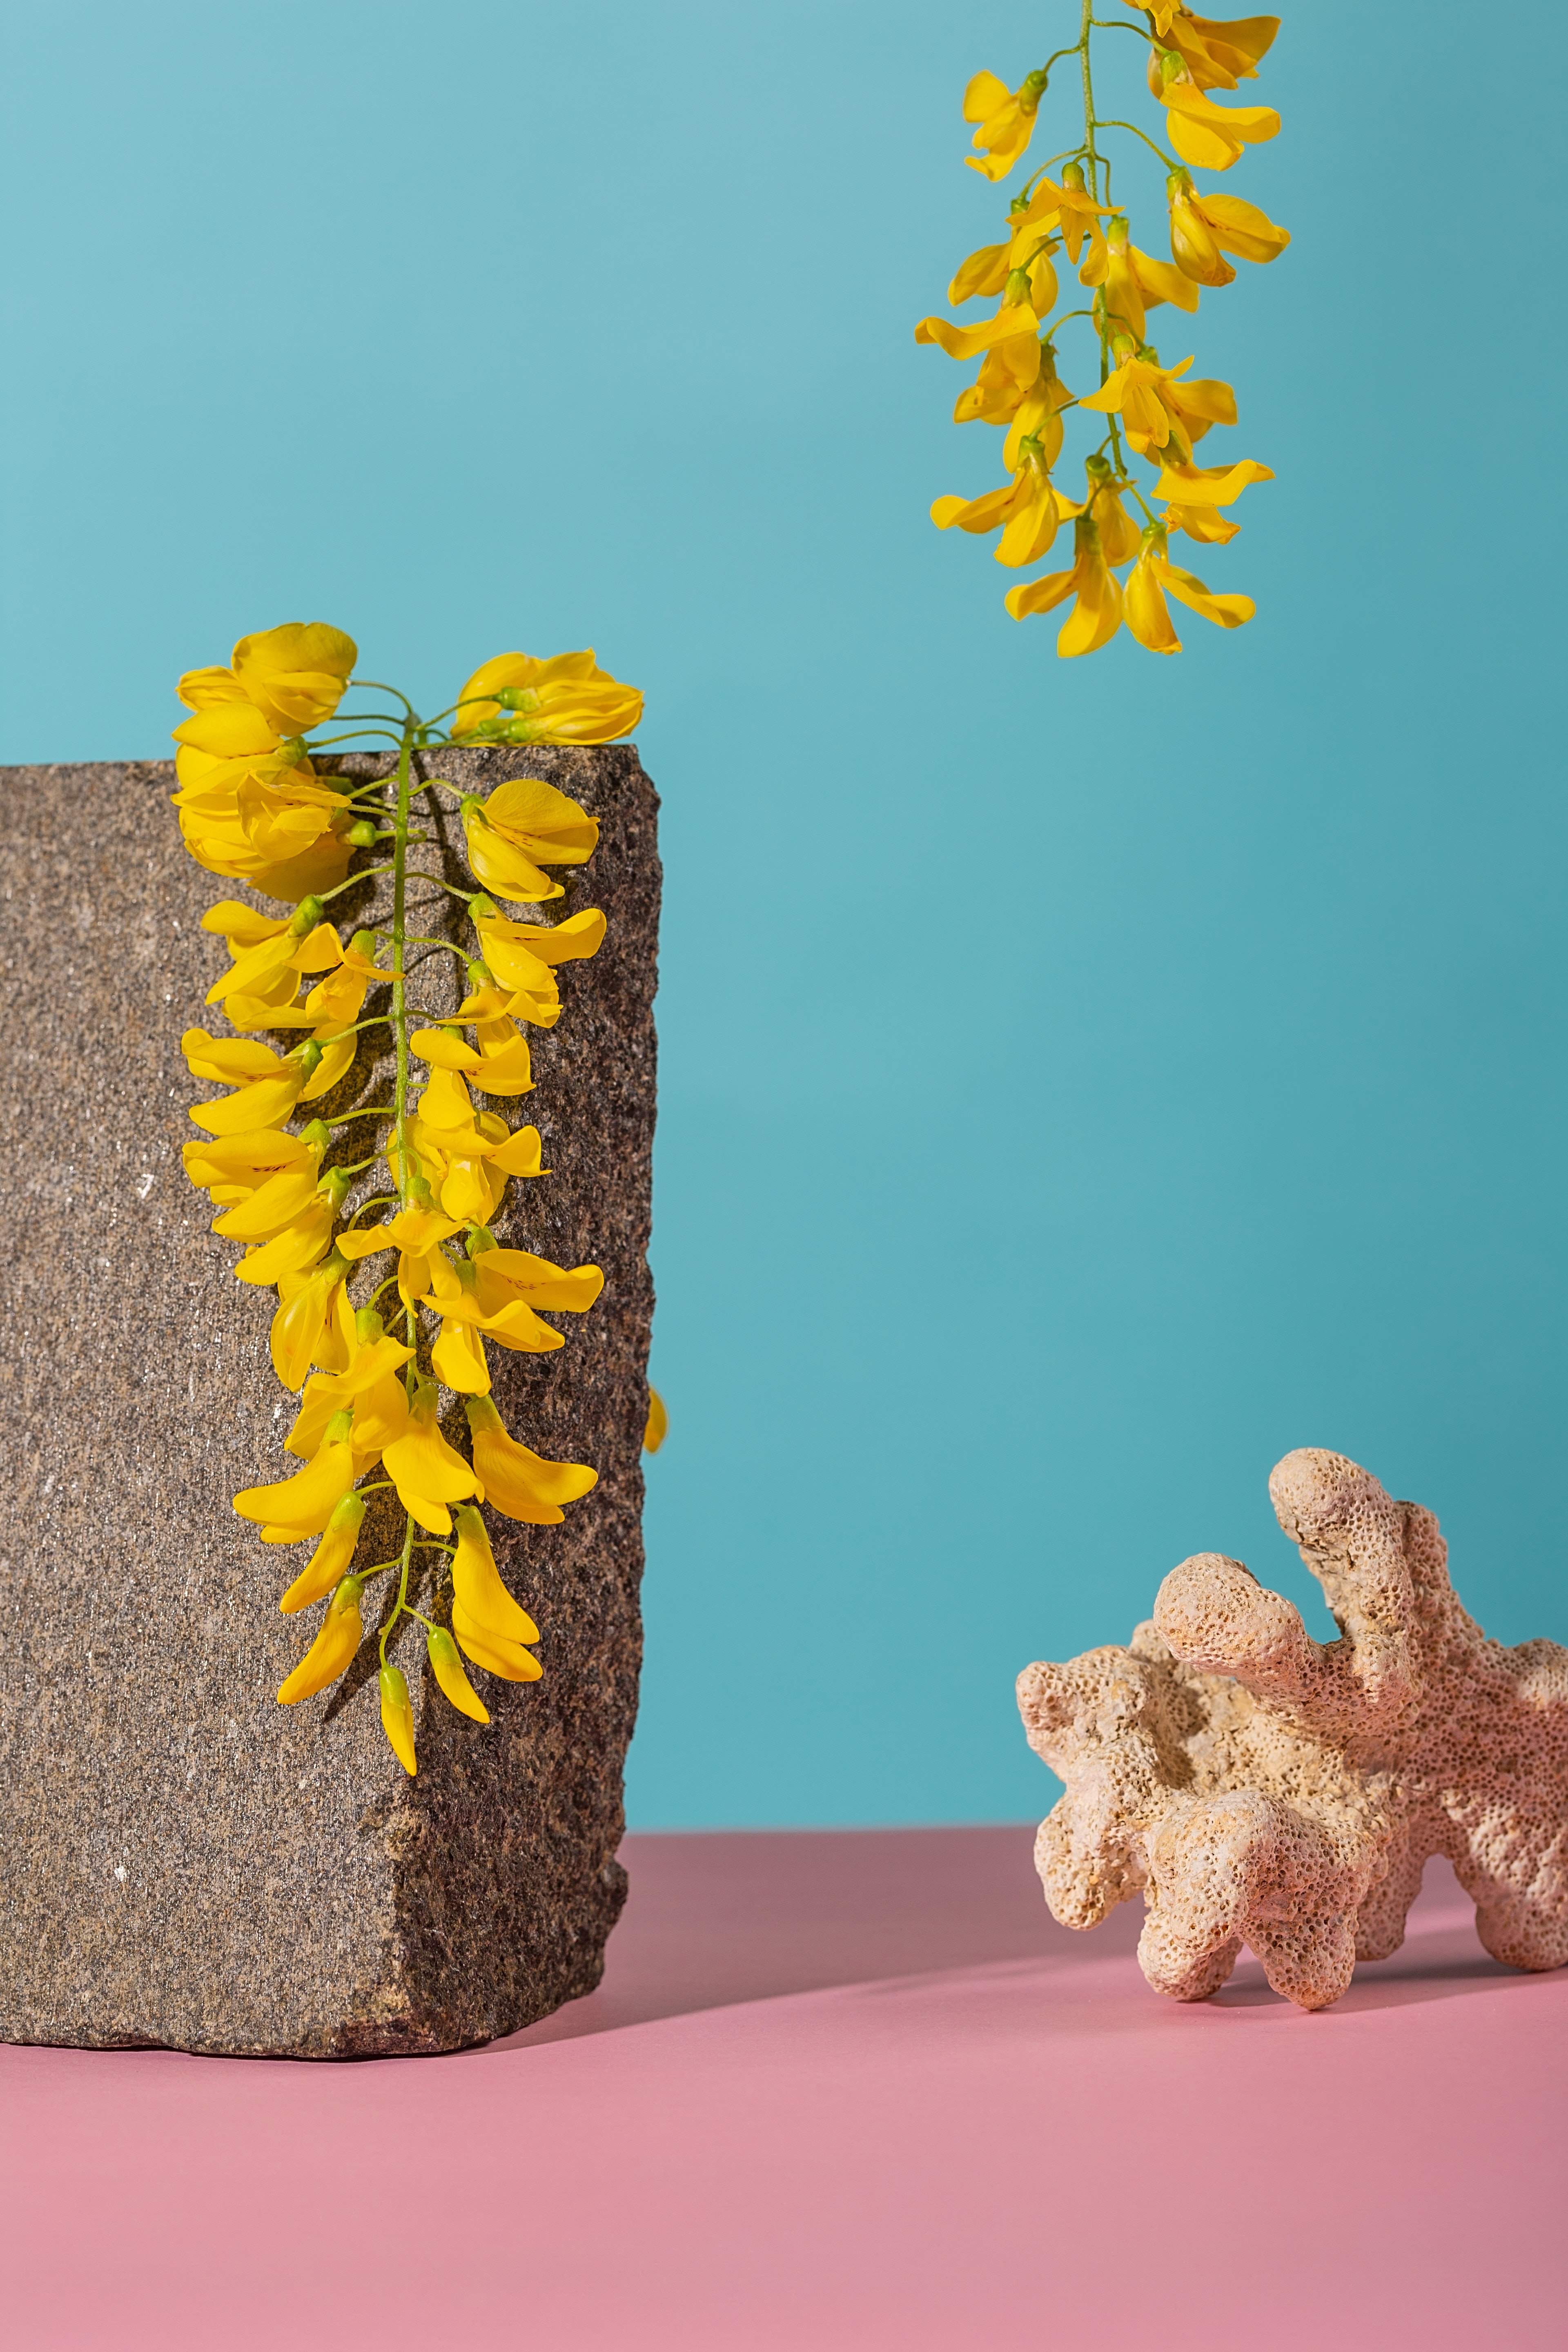 wallpapers brick, flowers, pink, still life, coral, blue, miscellanea, miscellaneous